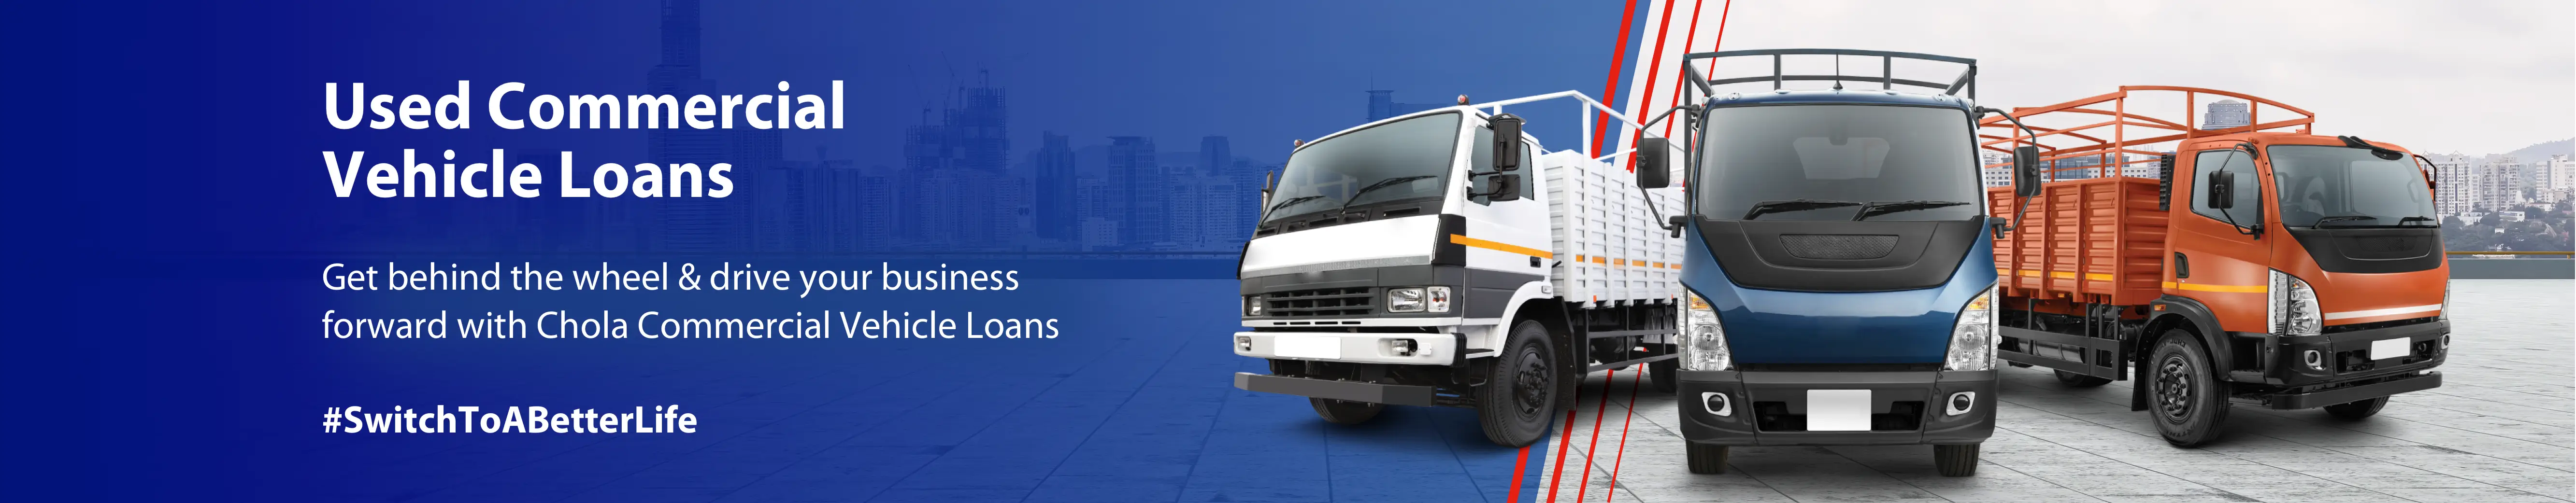 Used Commercial Vehicle Loans